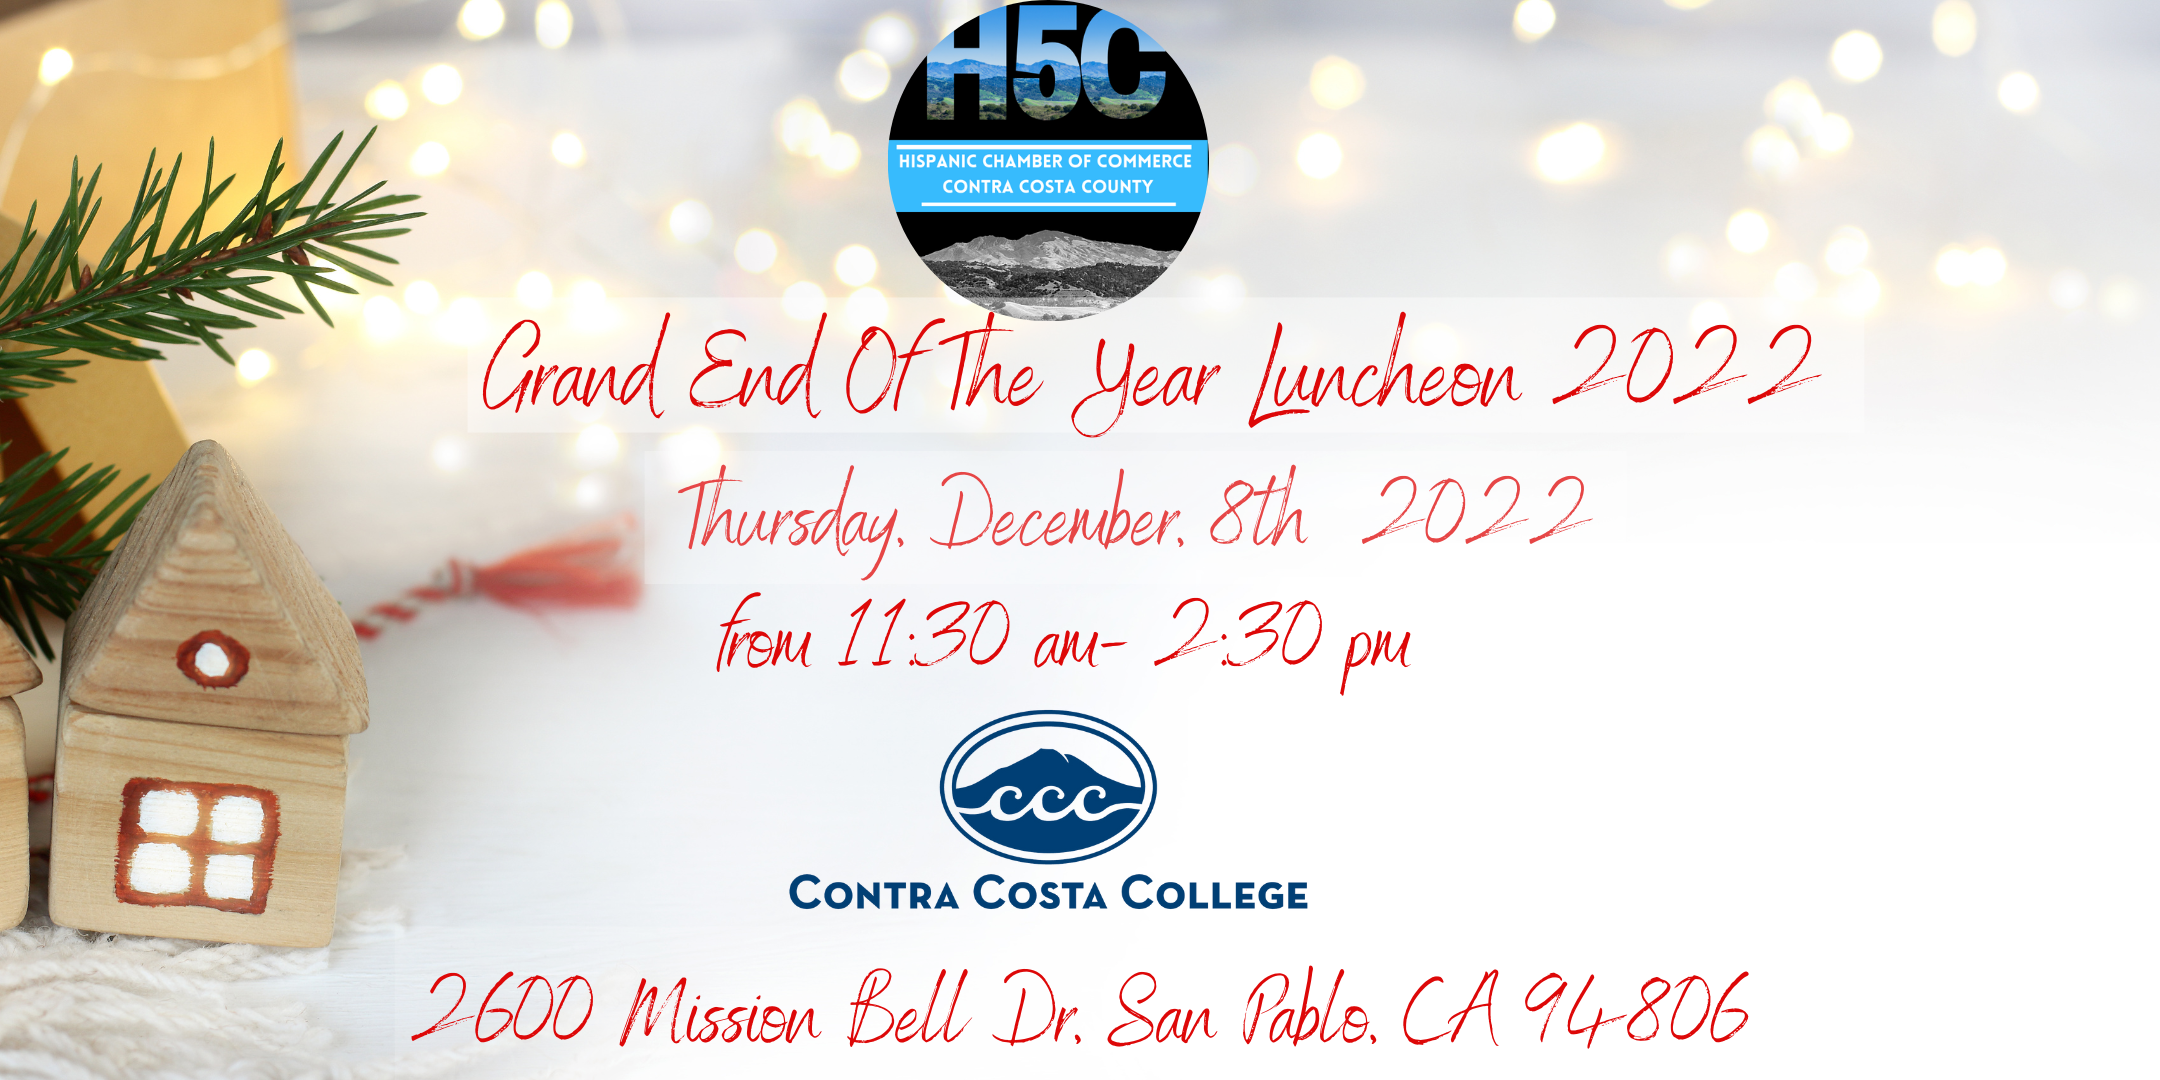 Grand End of The Year Luncheon 2022